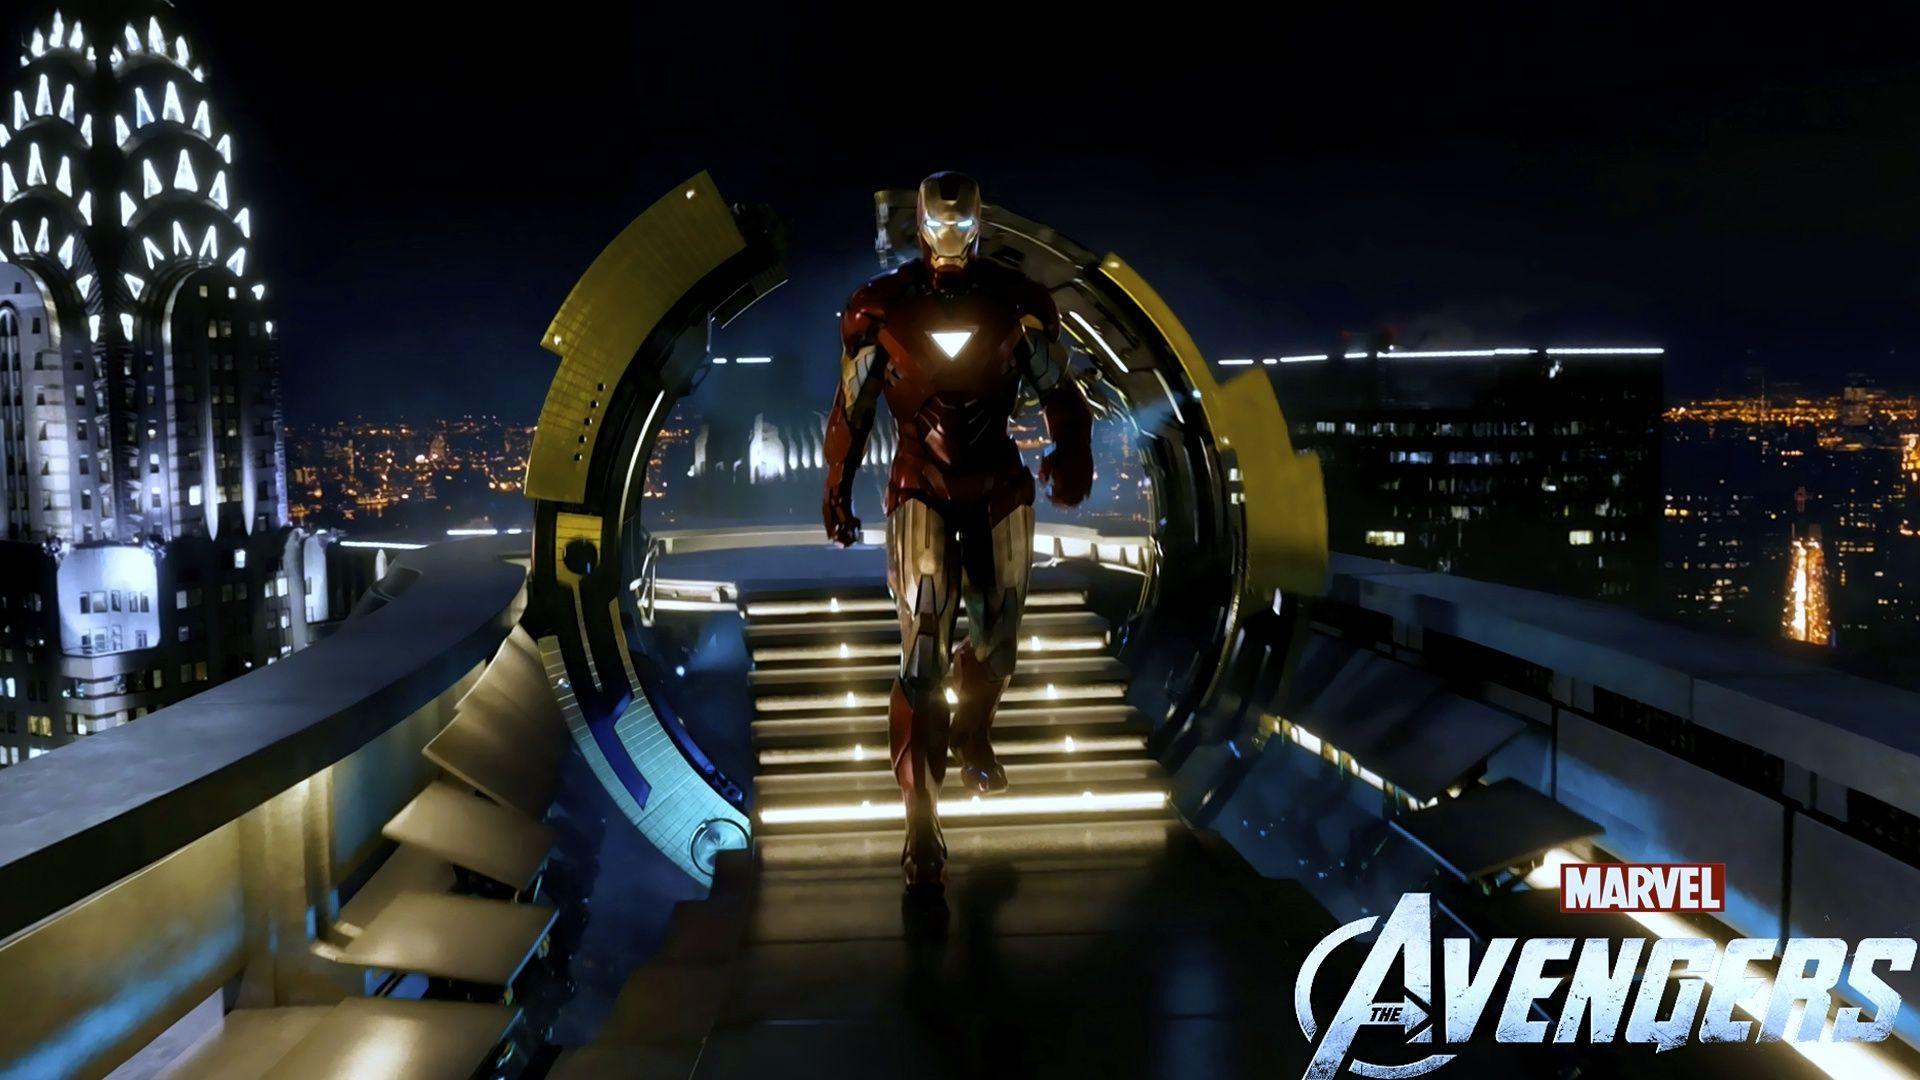 Arriving at Stark tower